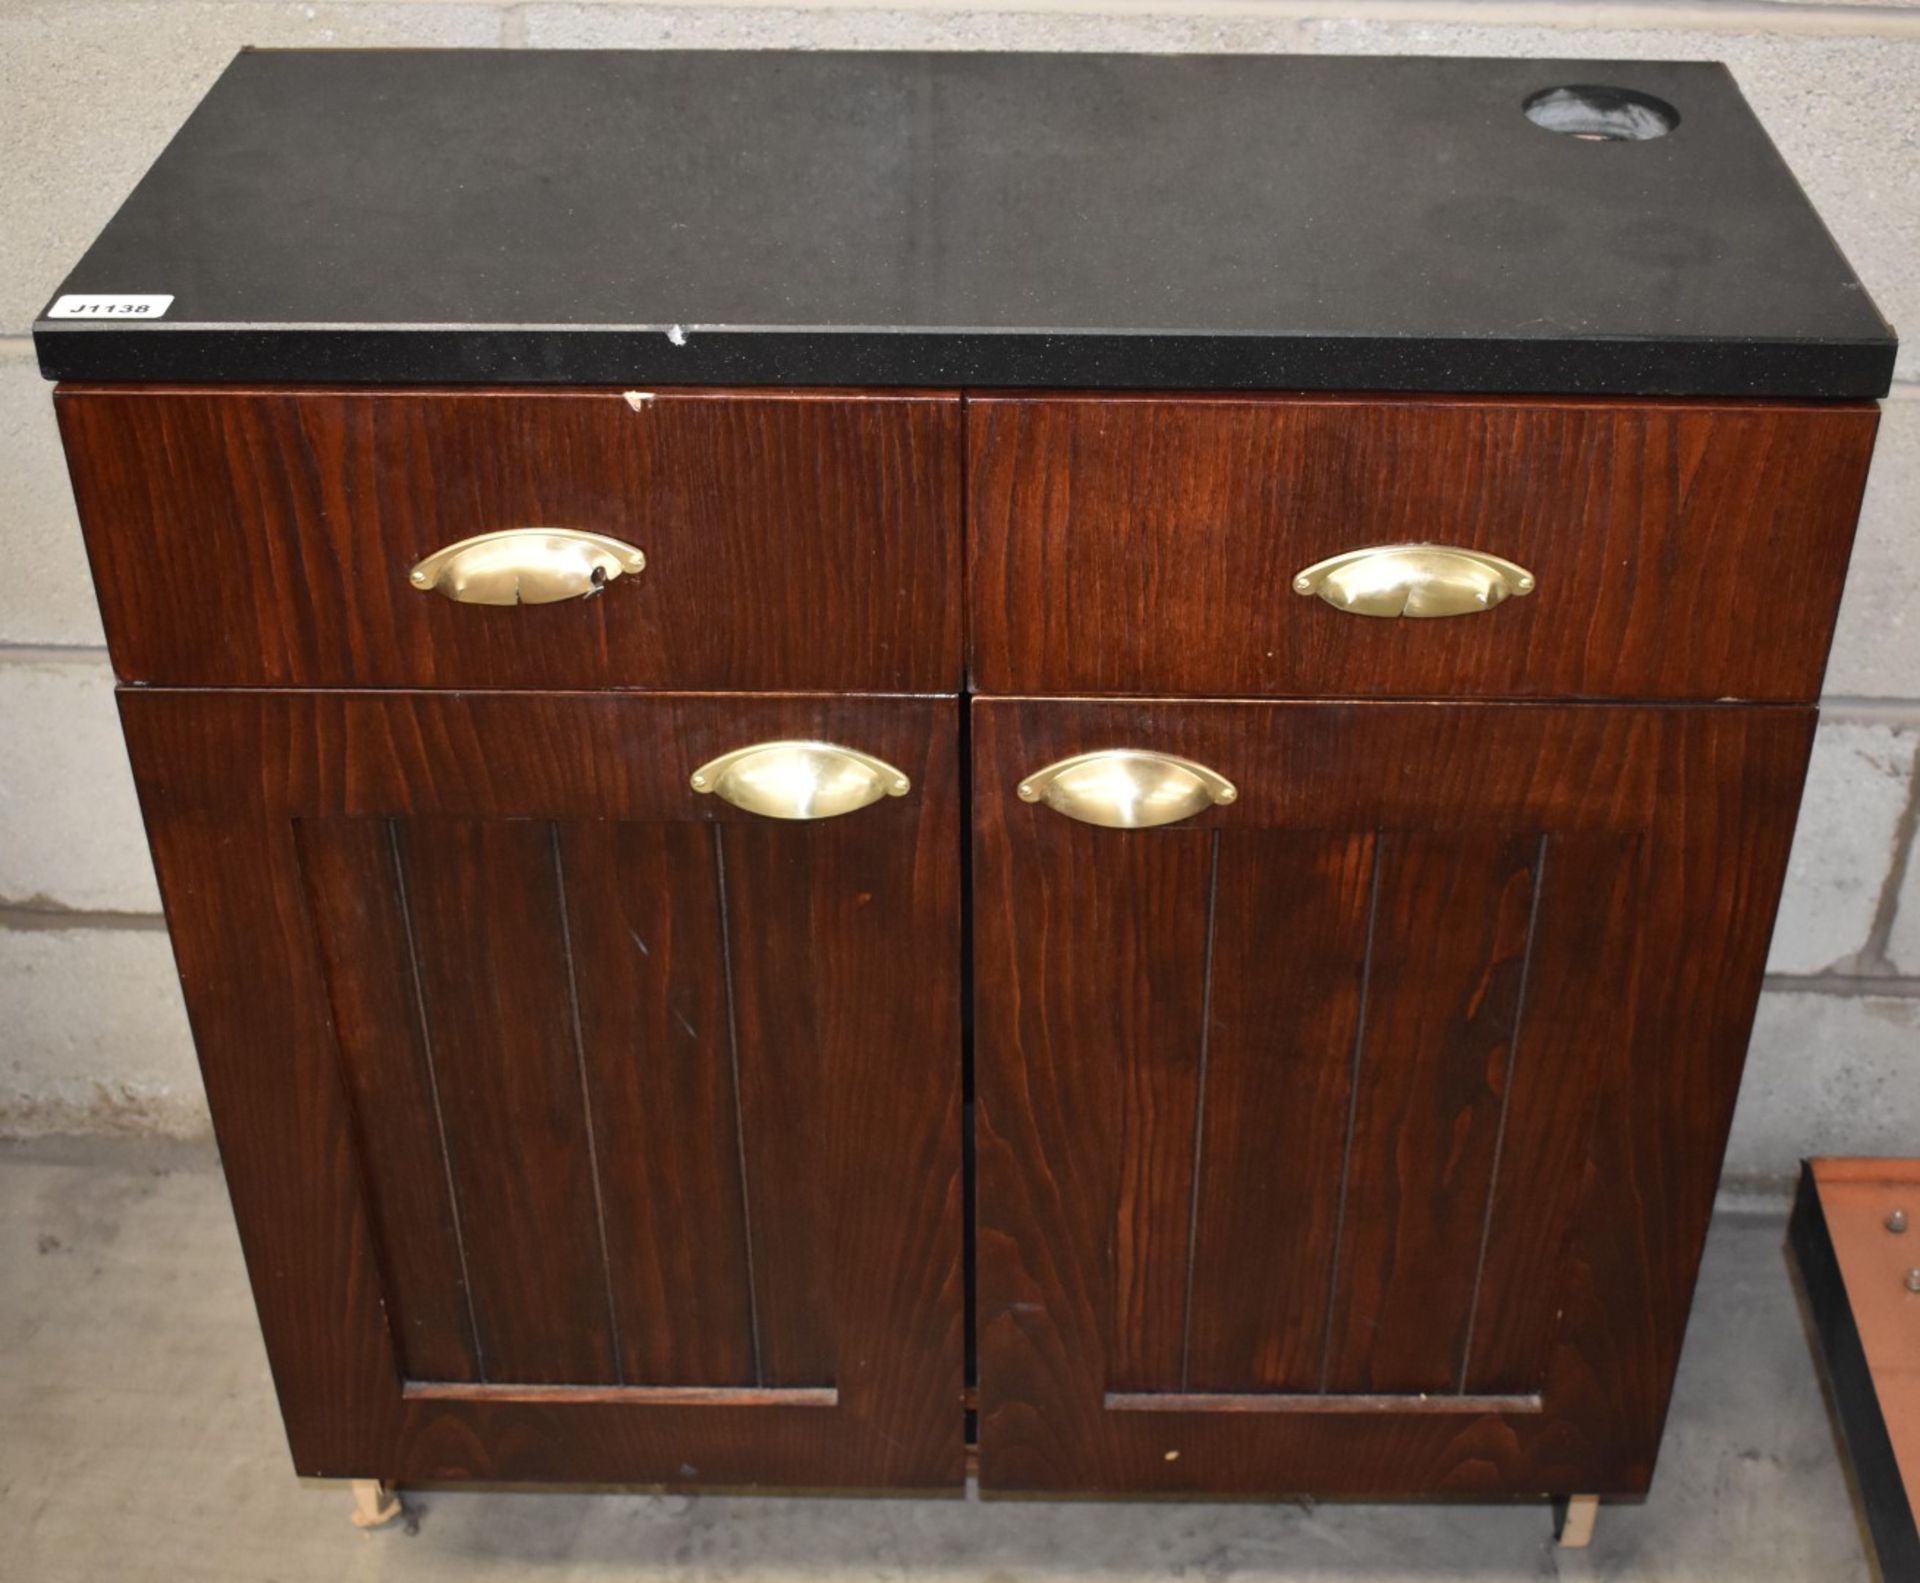 1 x Waitress Server Counter With Dark Wood Finish, Brass Hardware and Stone Top - H90 x W870 x D33